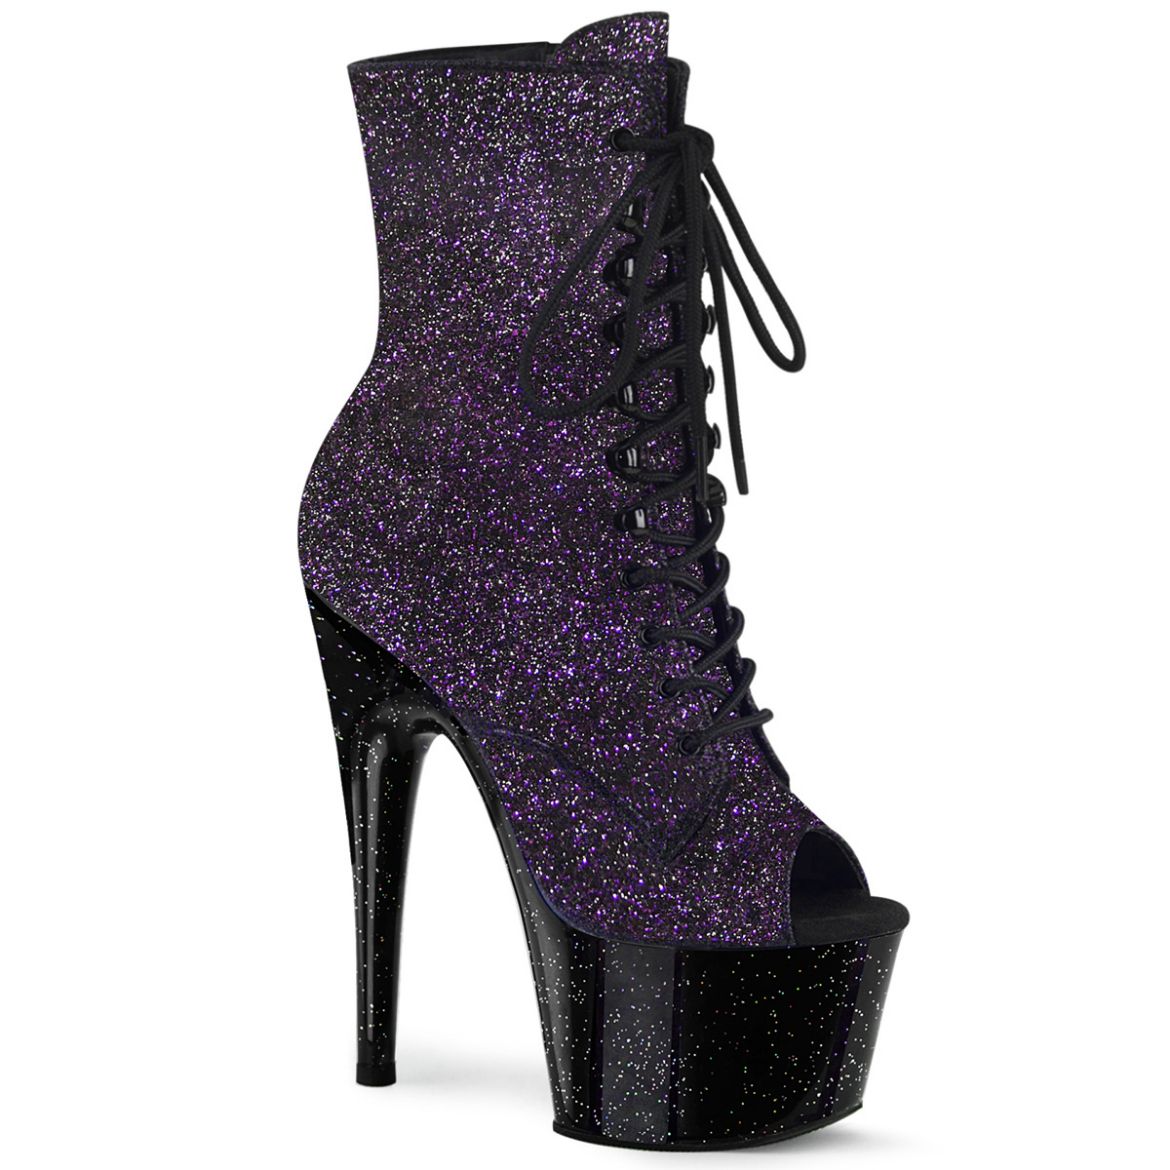 Product image of Pleaser ADORE-1021MBG Purple Glitter/Black 7 inch (17.8 cm) Heel 2 3/4 inch (7 cm) Platform Peep Toe Lace-Up Ankle Boot Side Zip